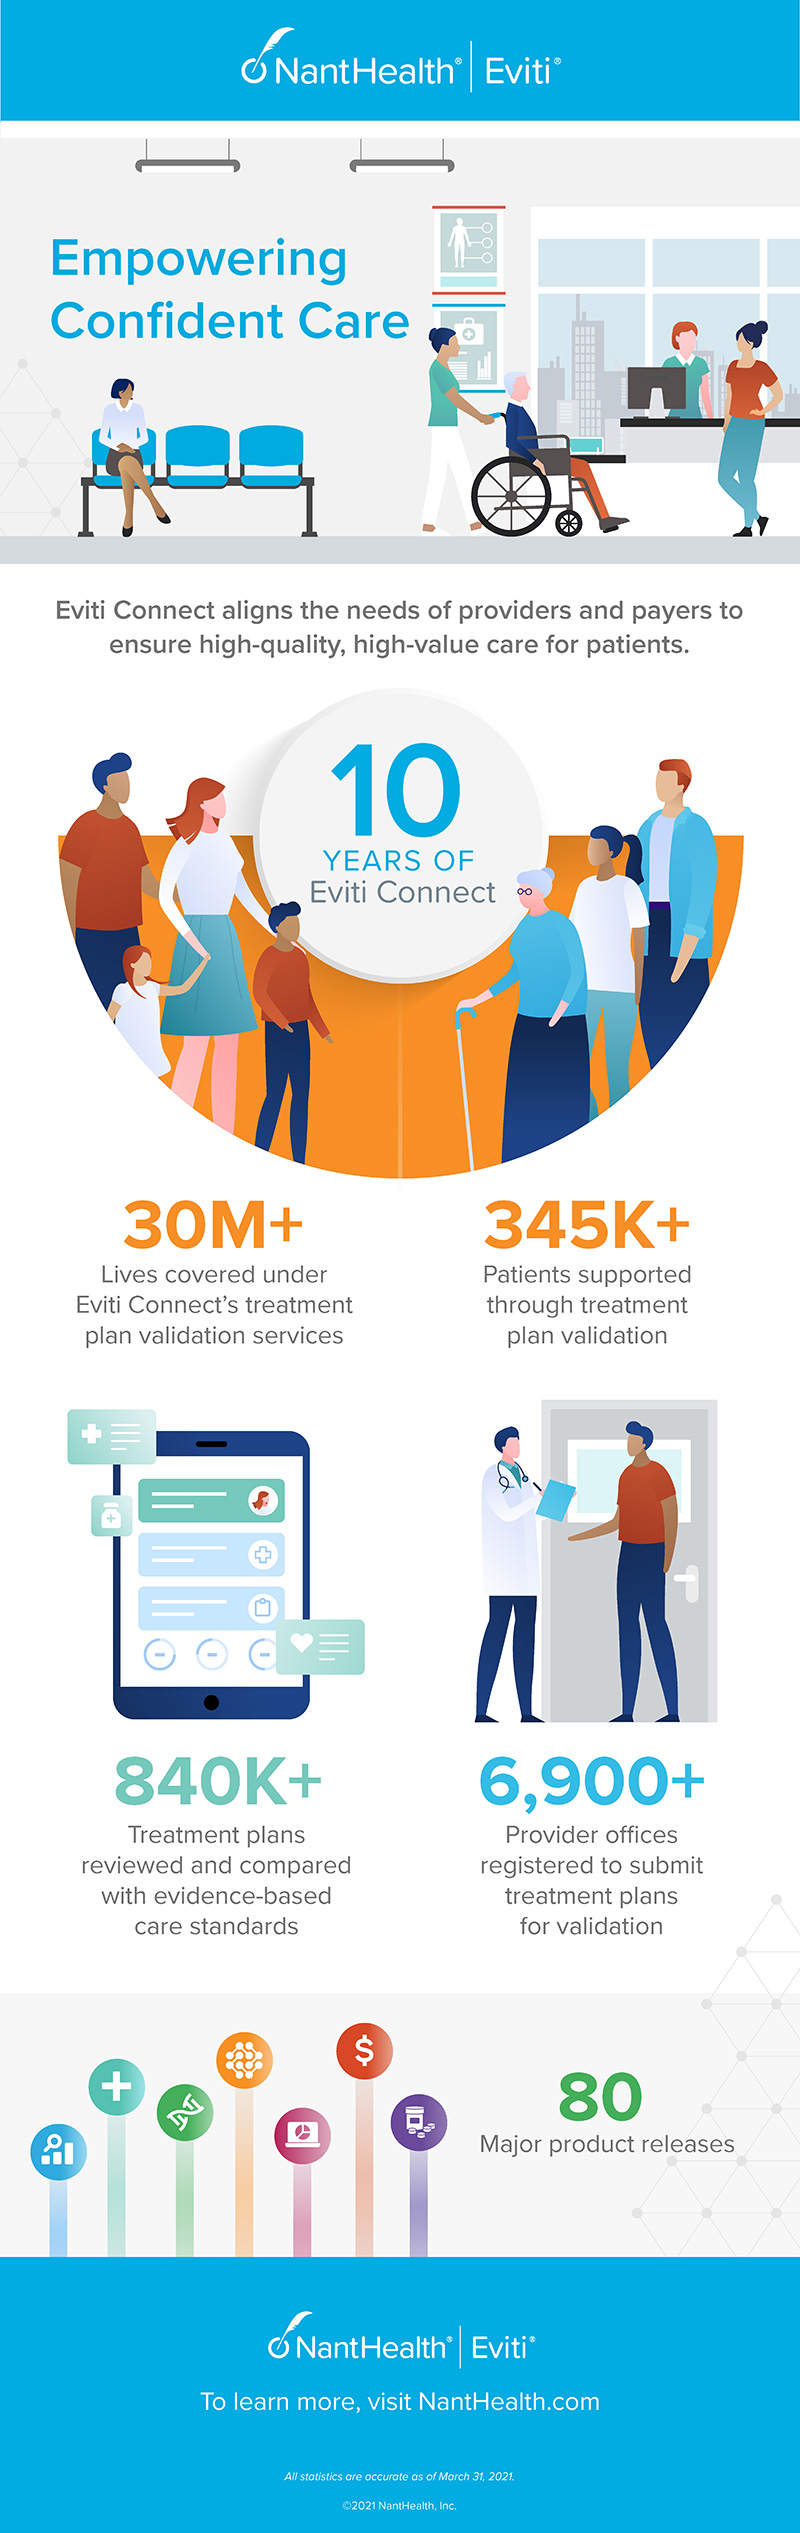 10 Years of Eviti Connect Full Infographic image